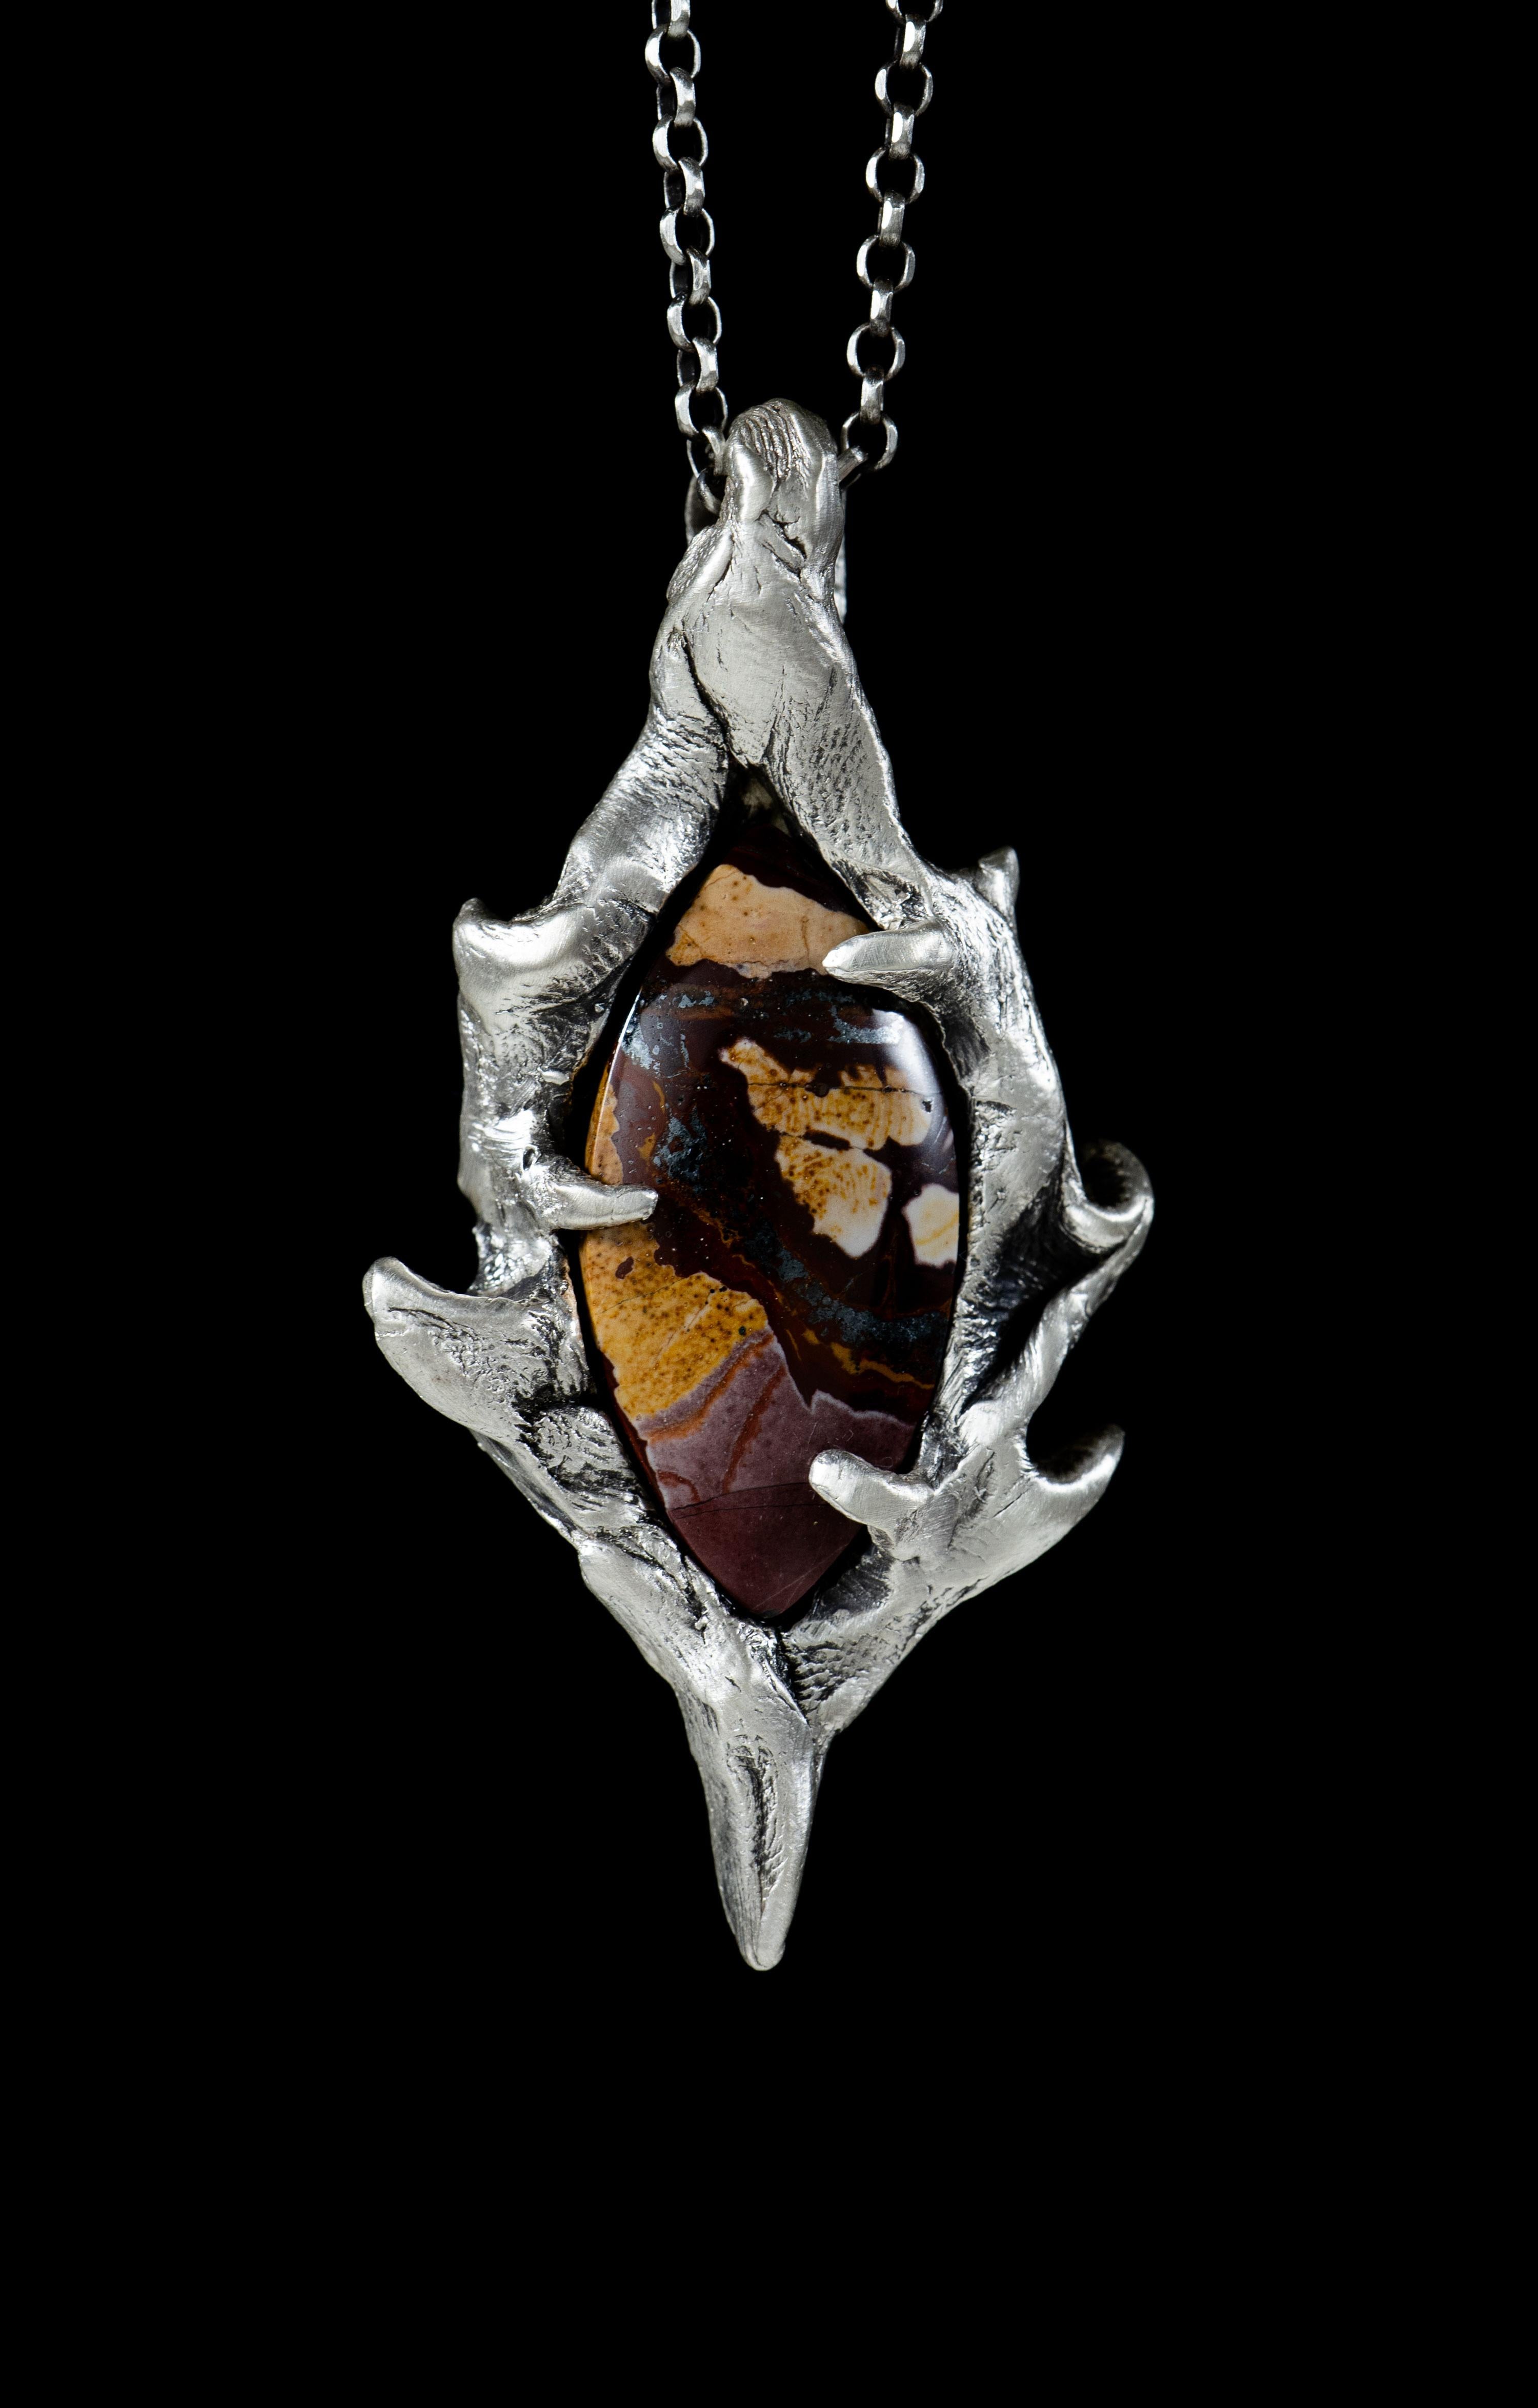 Portal is a one-of-a-kind pendant by Ken Fury that is hand-carved and cast in sterling silver and features a natural Red & Green Blanket Jasper from Peru. The pendant has a satin finish. 

Size of piece: 64mm x 34mm

Hand-signed

Includes a 24-inch